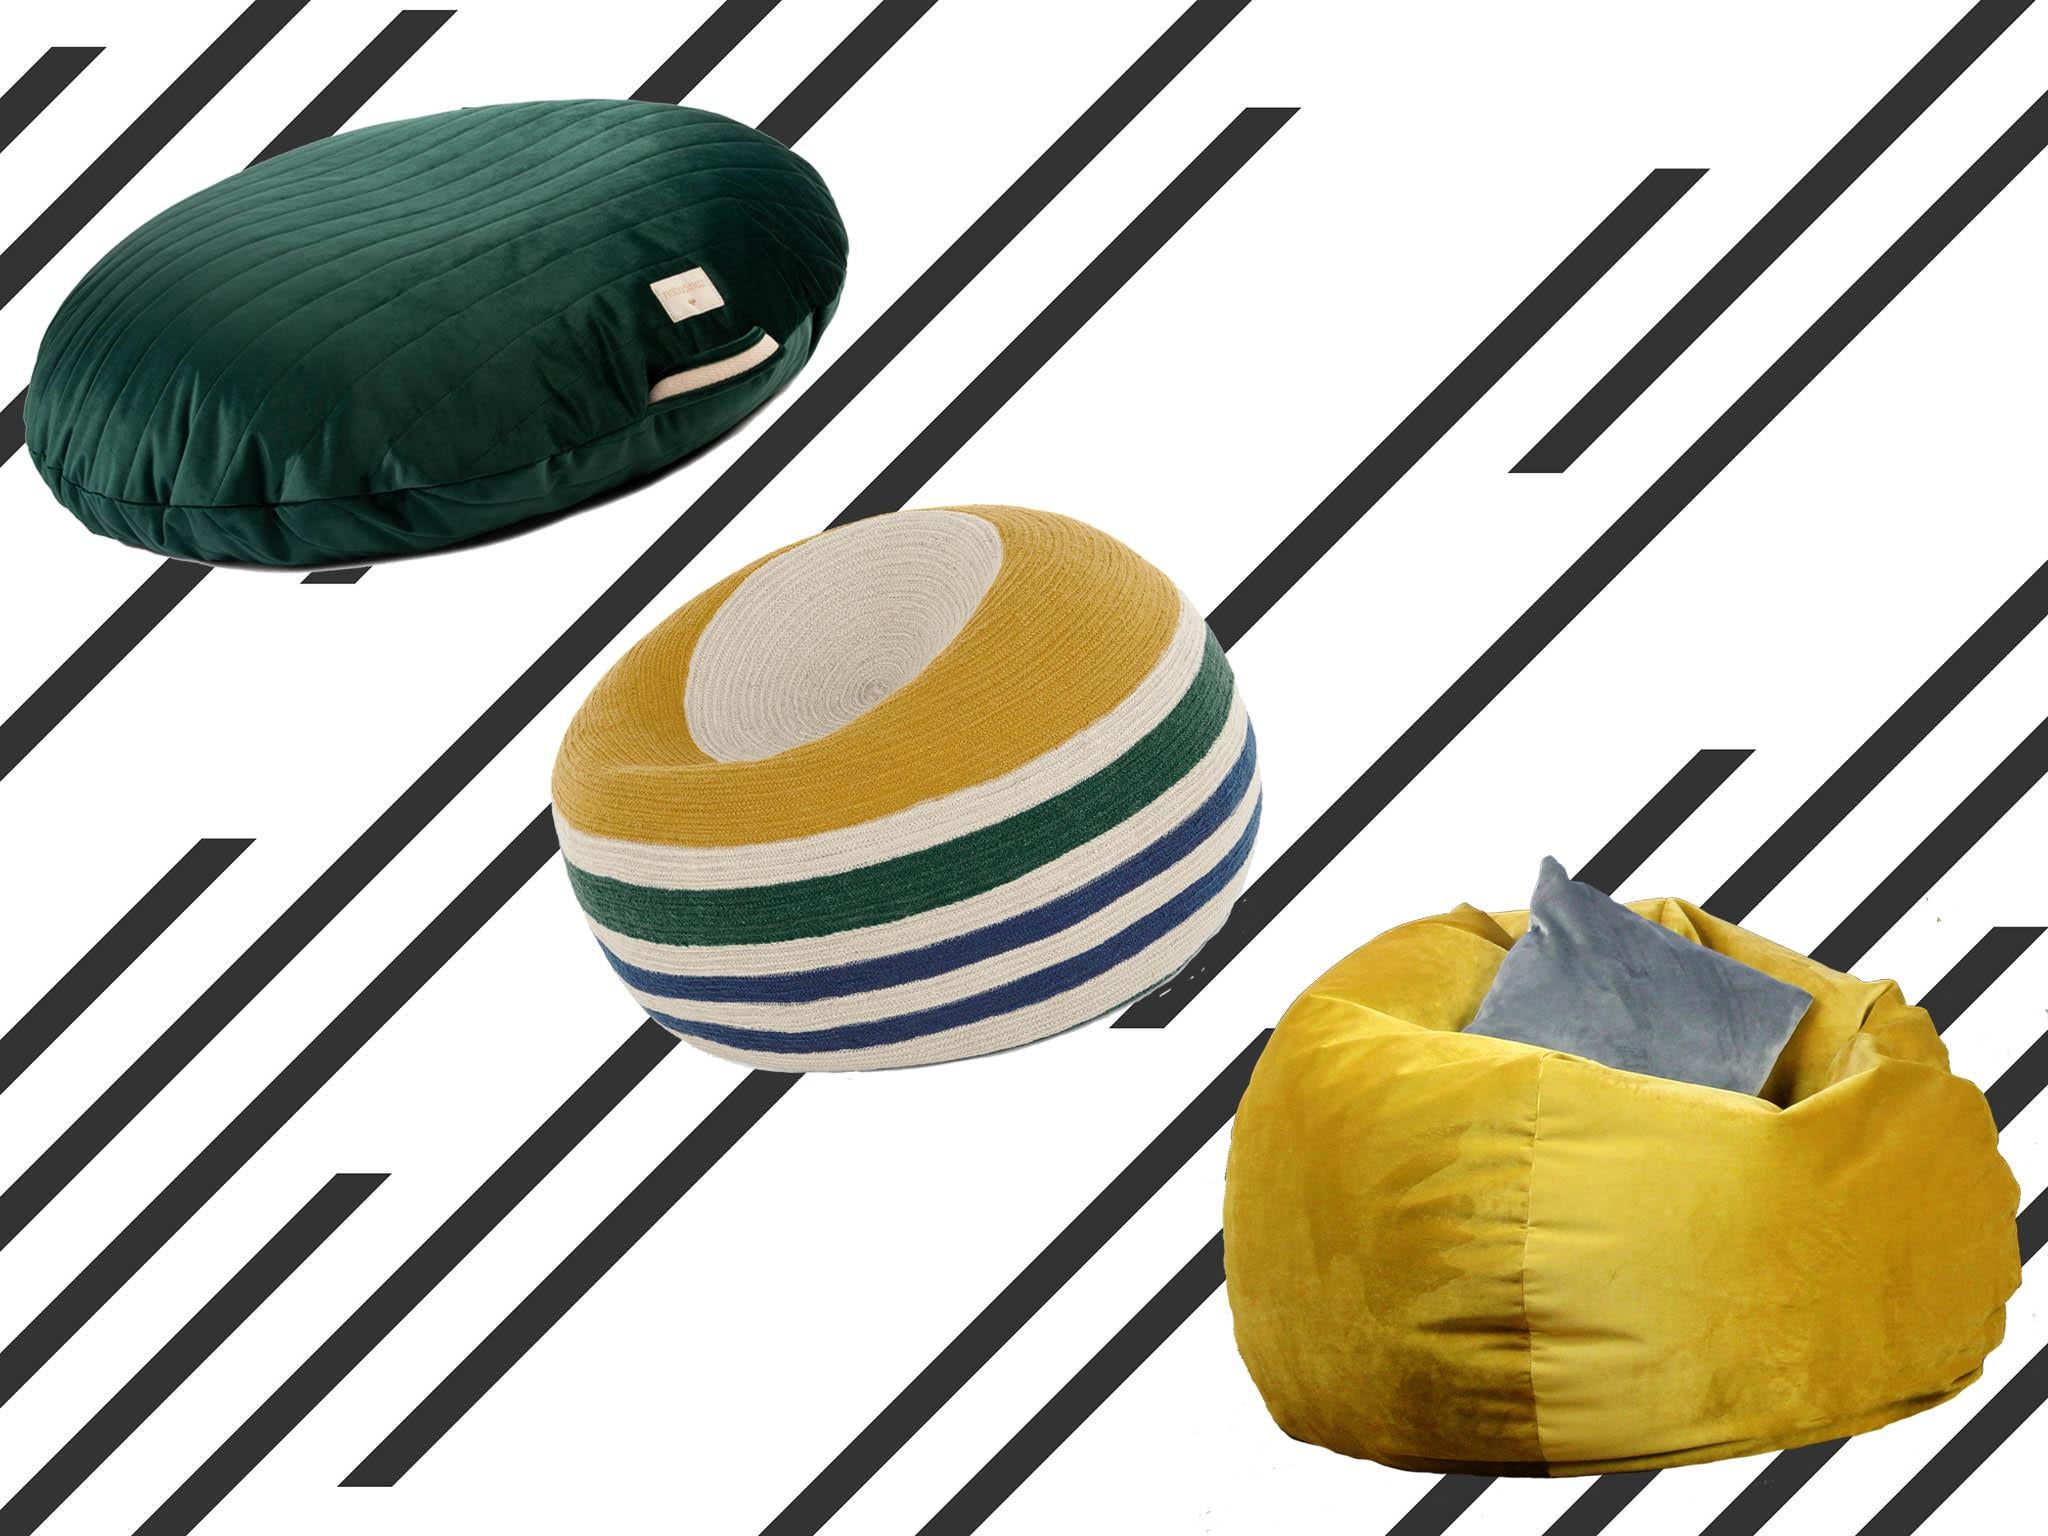 Best Beanbags That Are Comfy And Useful